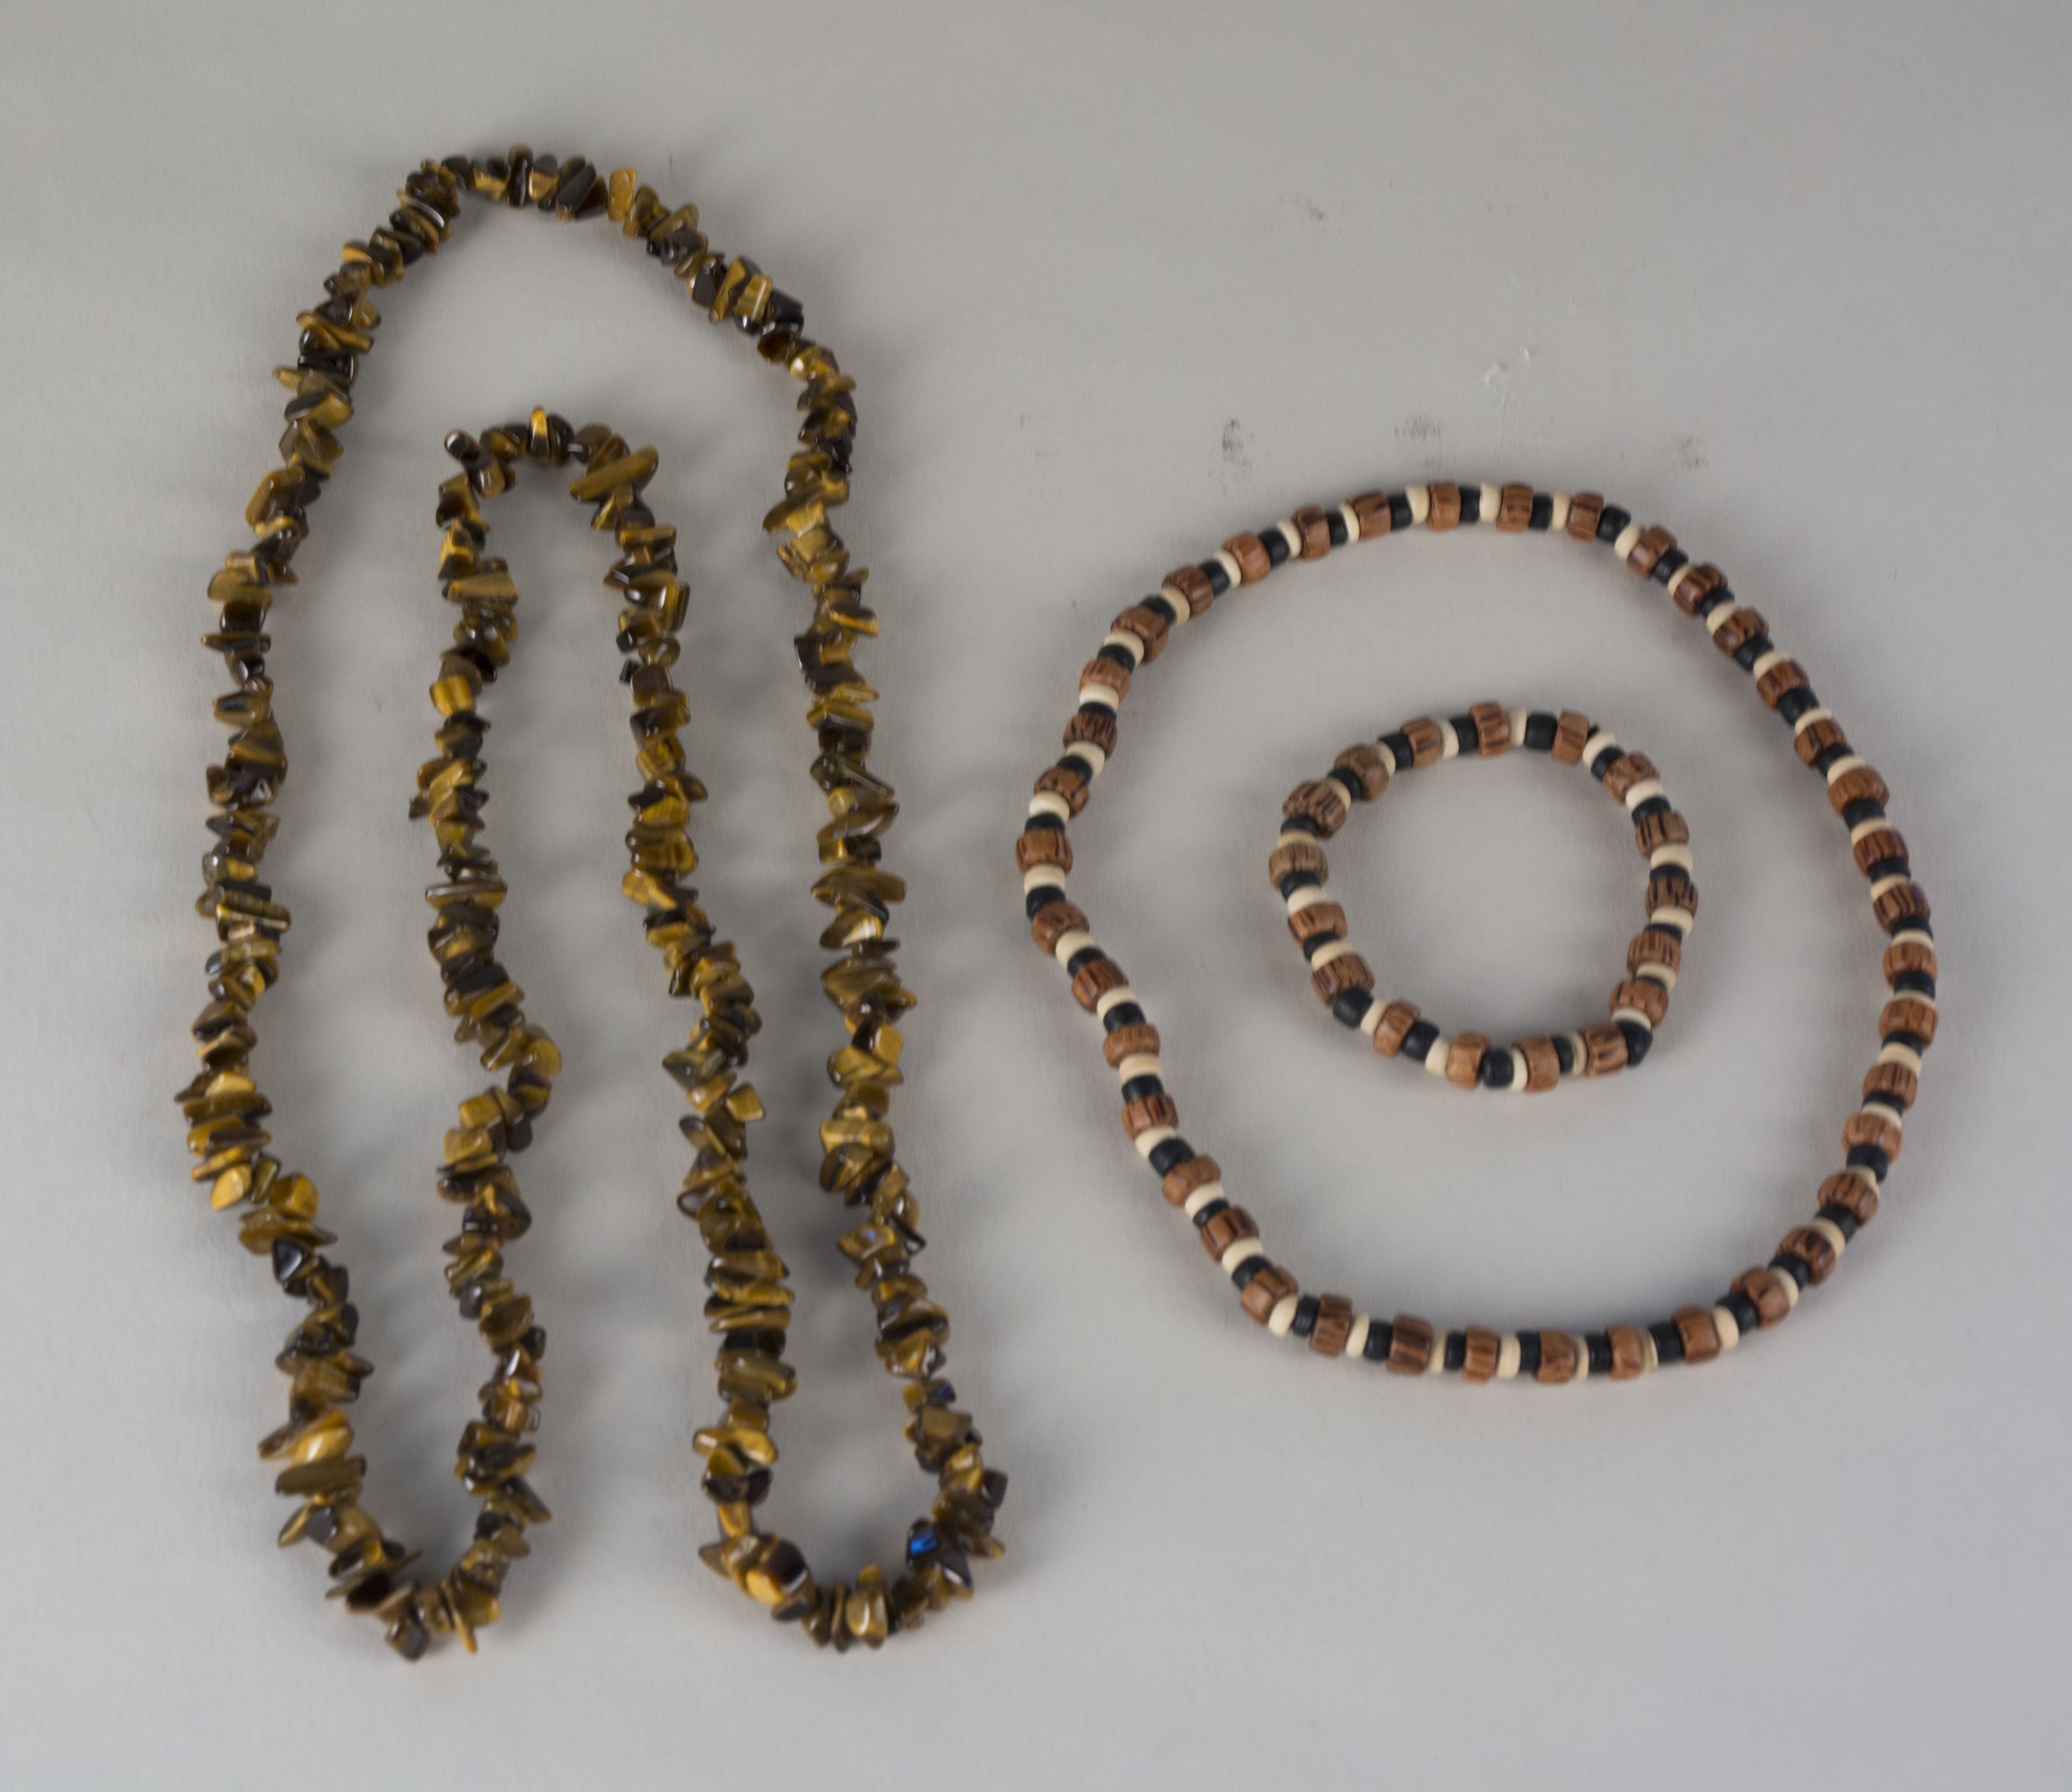 Necklaces and Bracelet owned by Necitas TanObjects were a gift from Tan’s niece, Eva Denoman, who is from Iloilo. They were given to Tan in 1975. Tan wears these to match her Filipino-style clothes, which she wears to gatherings. Any views, findings, conclusions, or recommendations expressed in this story do not necessarily represent those of the National Endowment for the Humanities. (c) Field Museum of Natural History - CC BY-NC 4.0